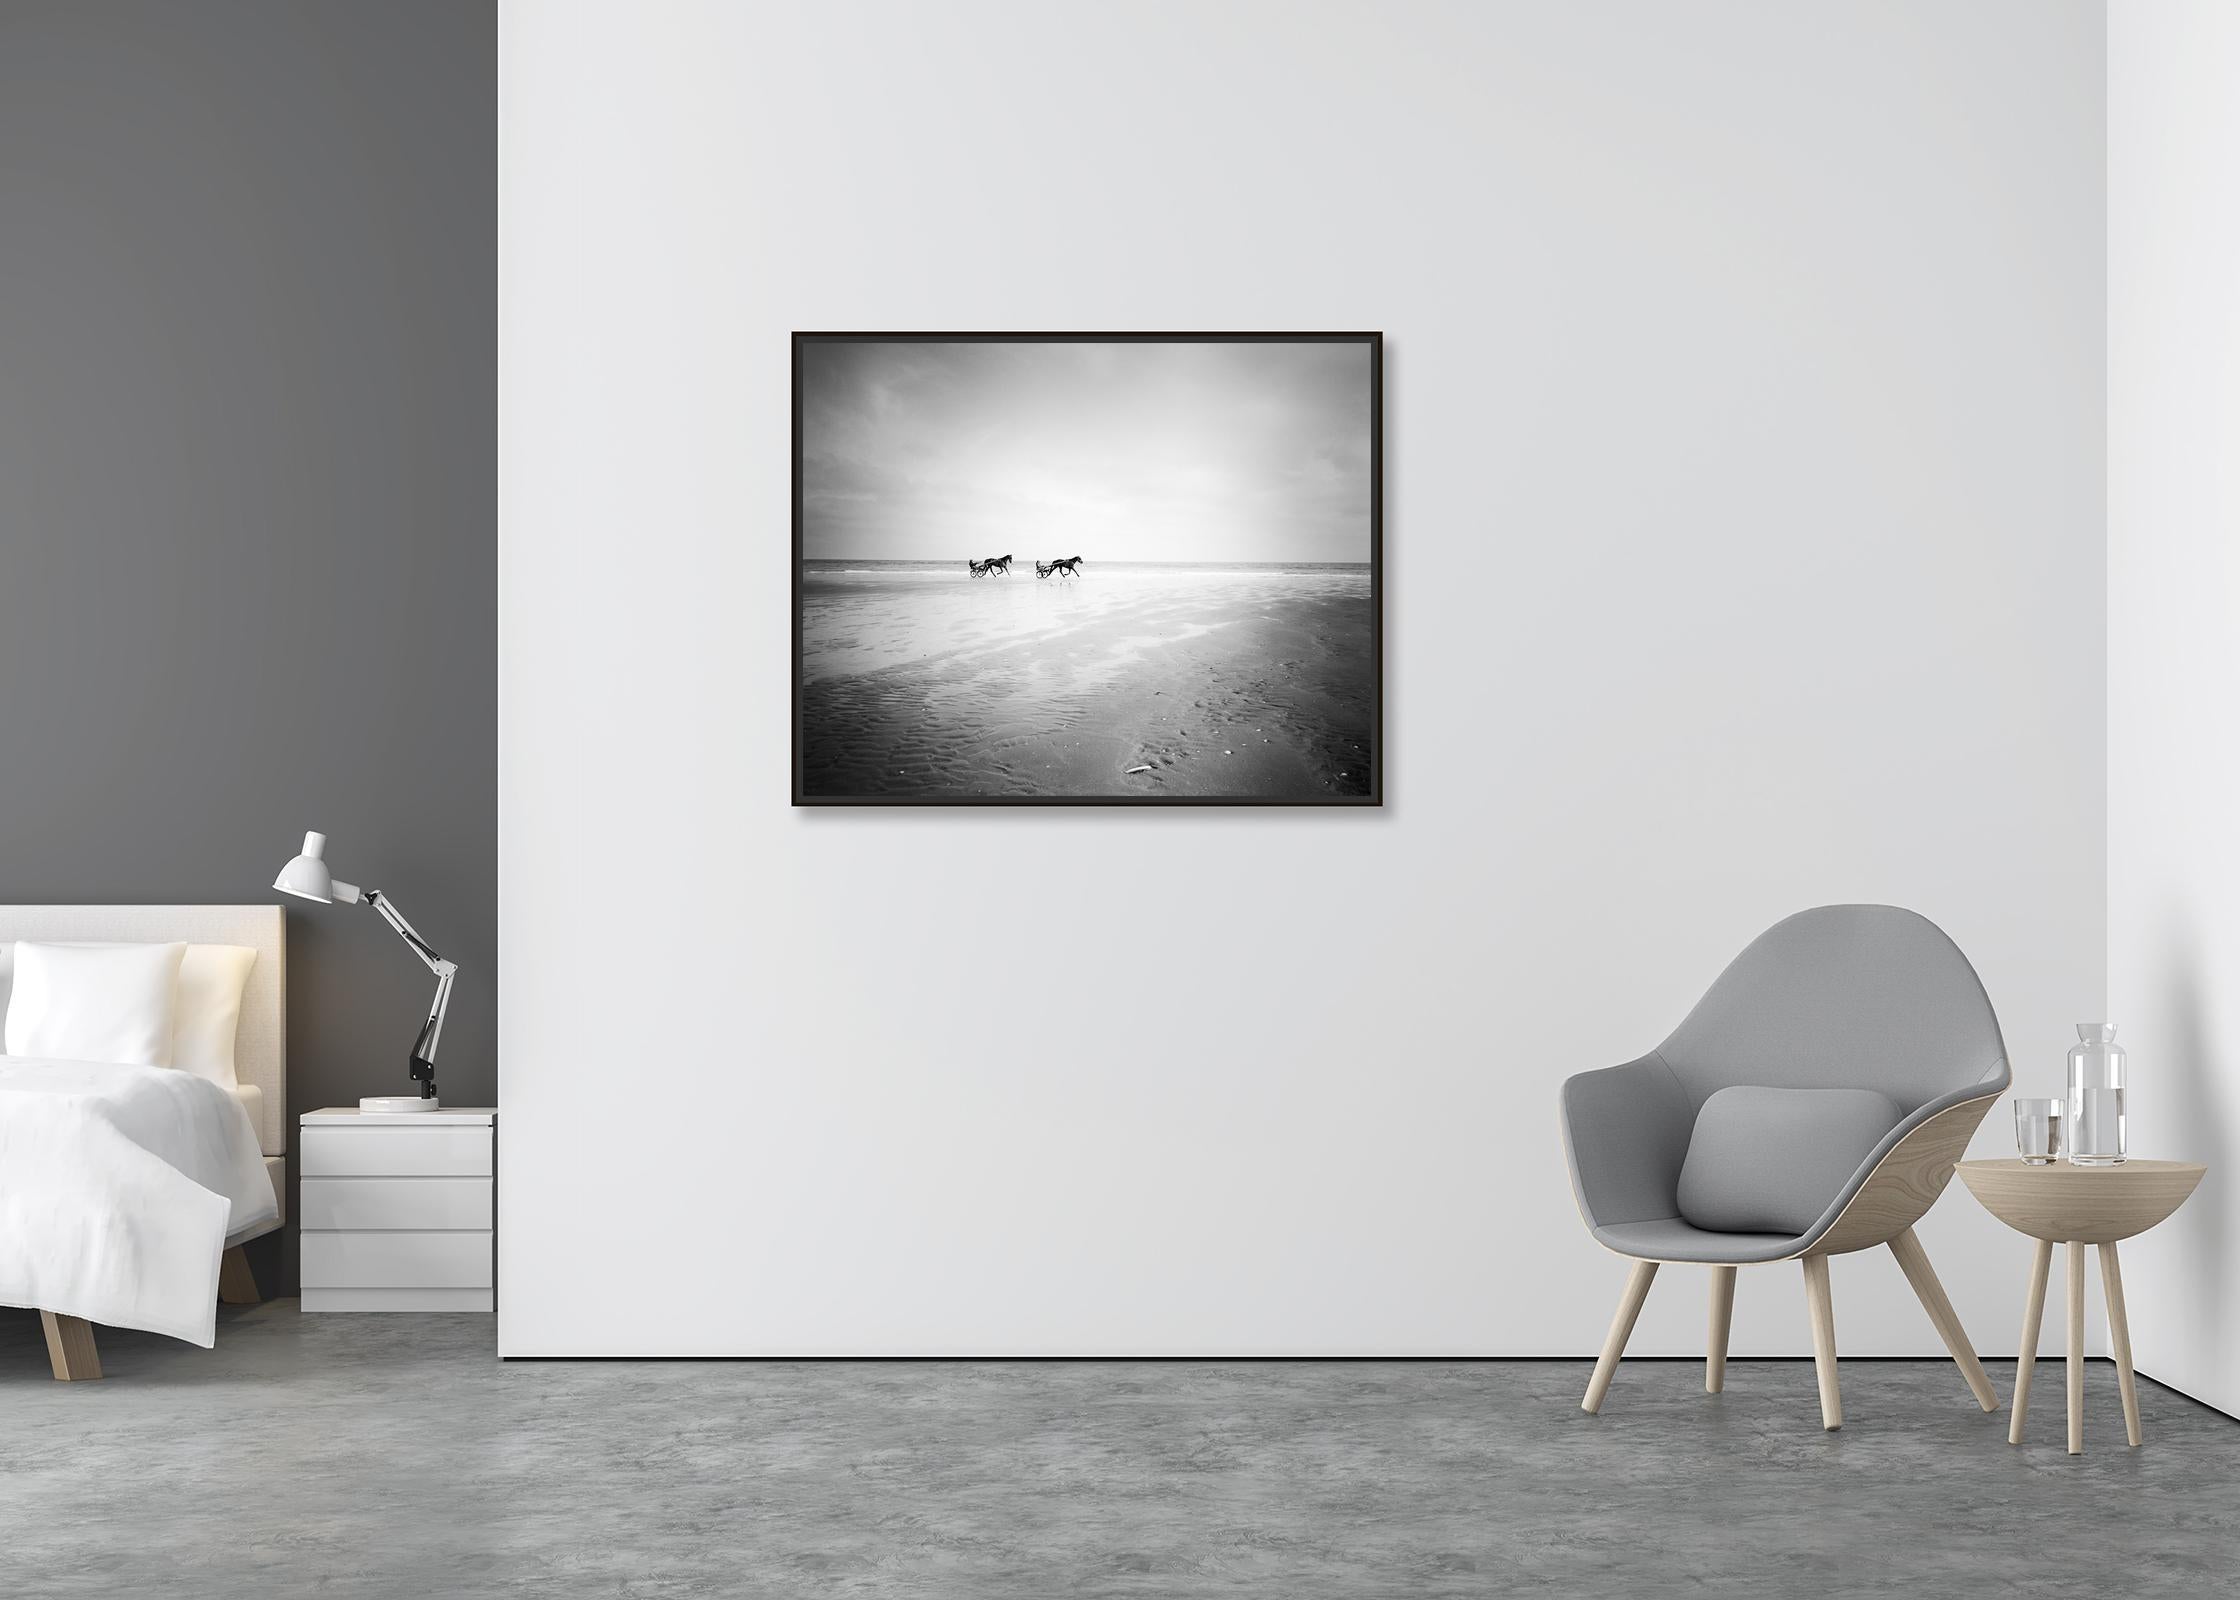 Harness Racing, horse riding, beach, black and white photography, landscape - Contemporary Photograph by Gerald Berghammer